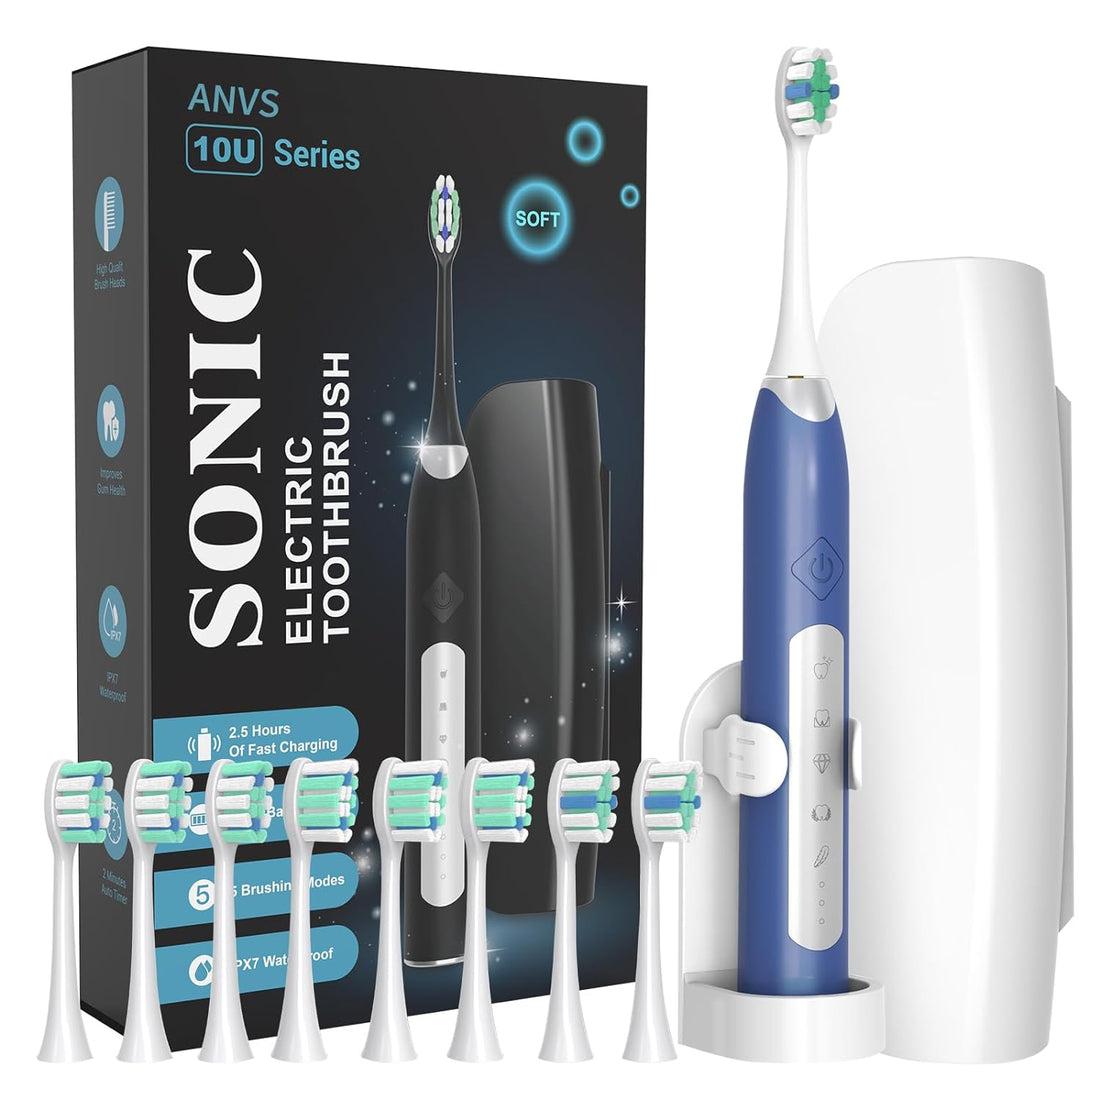 Sonic Electric Toothbrushes for Adults, 8 Brush Heads Electric Toothbrush Deep Clean 5 Modes, Rechargeable Travel Toothbrushes Fast Charge with 2 Minutes Smart Timer (Dark Blue)